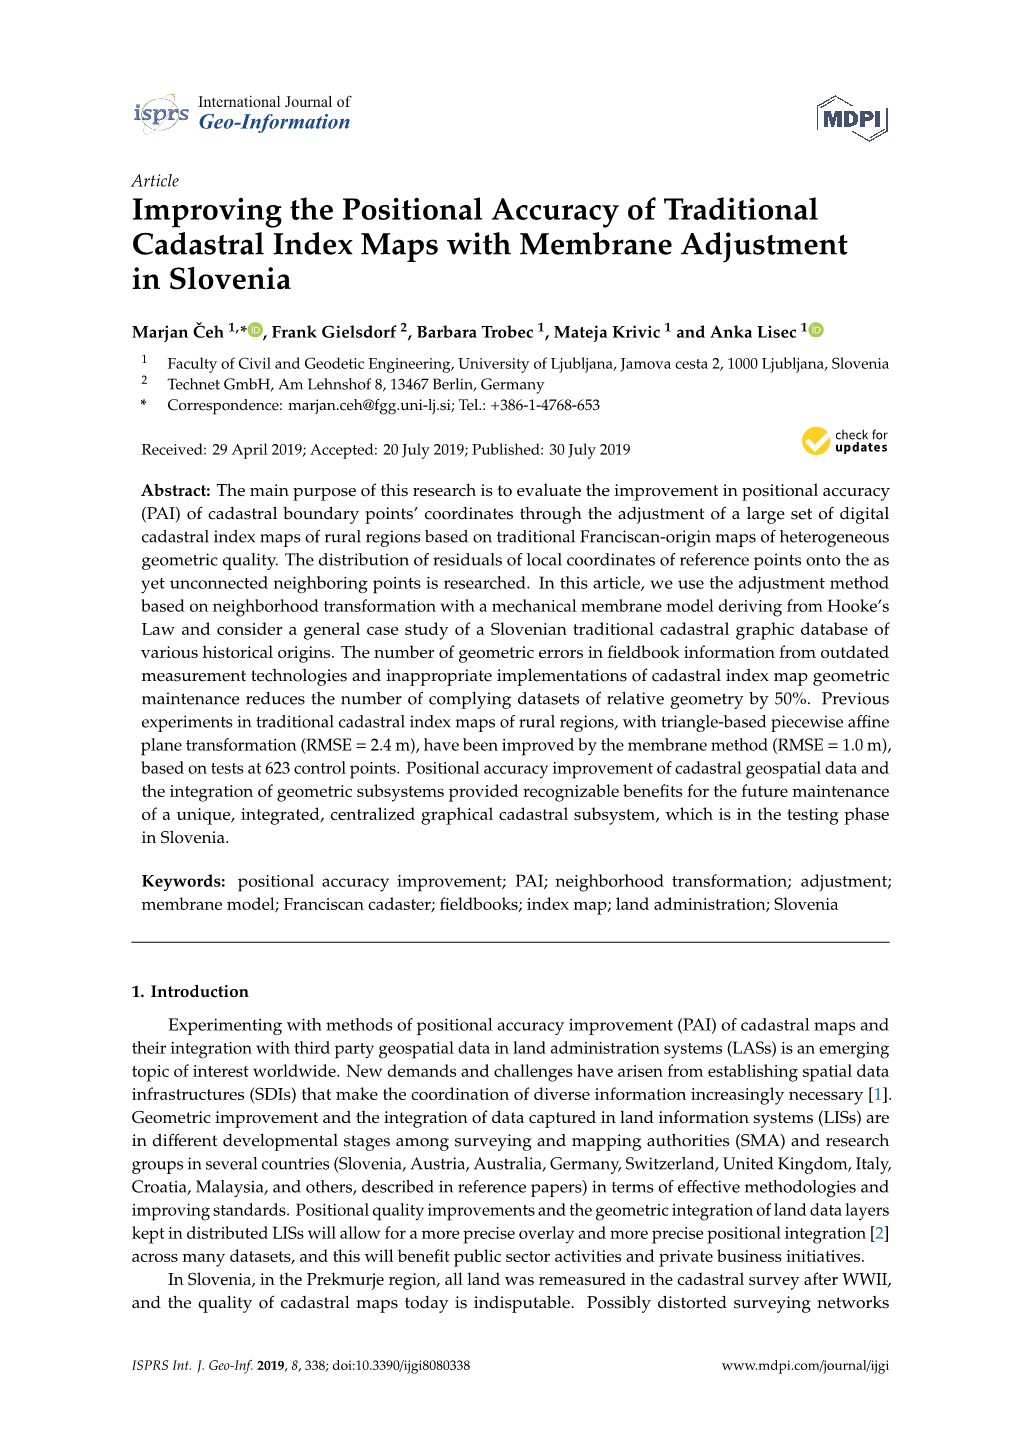 Improving the Positional Accuracy of Traditional Cadastral Index Maps with Membrane Adjustment in Slovenia